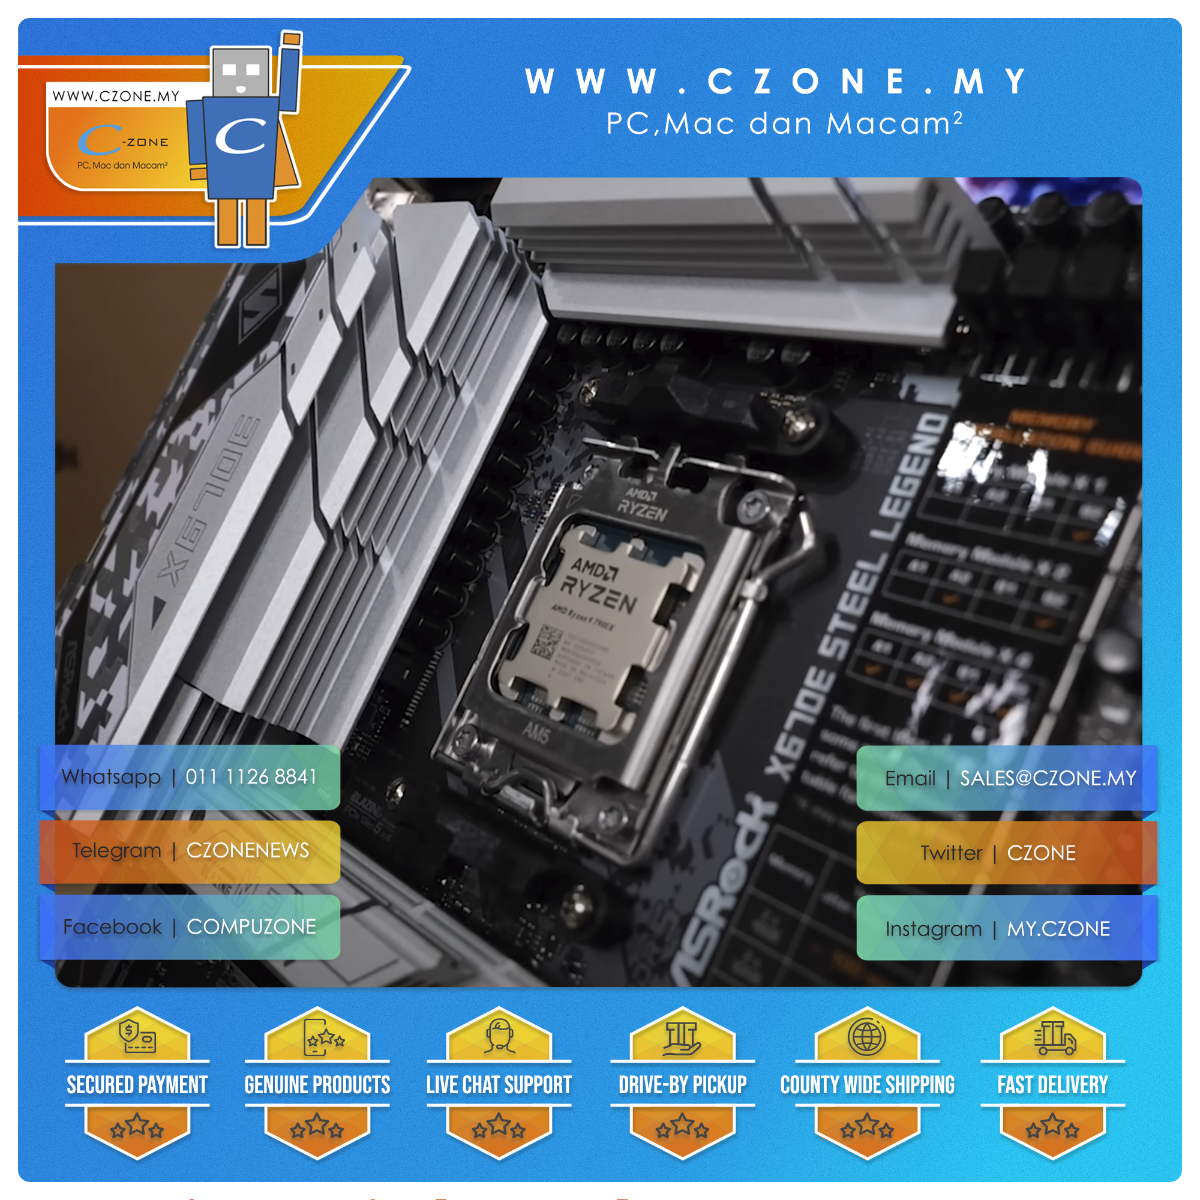 https://czone.my/czone/computer-components/core-components/motherboards.html?socket_type=9957